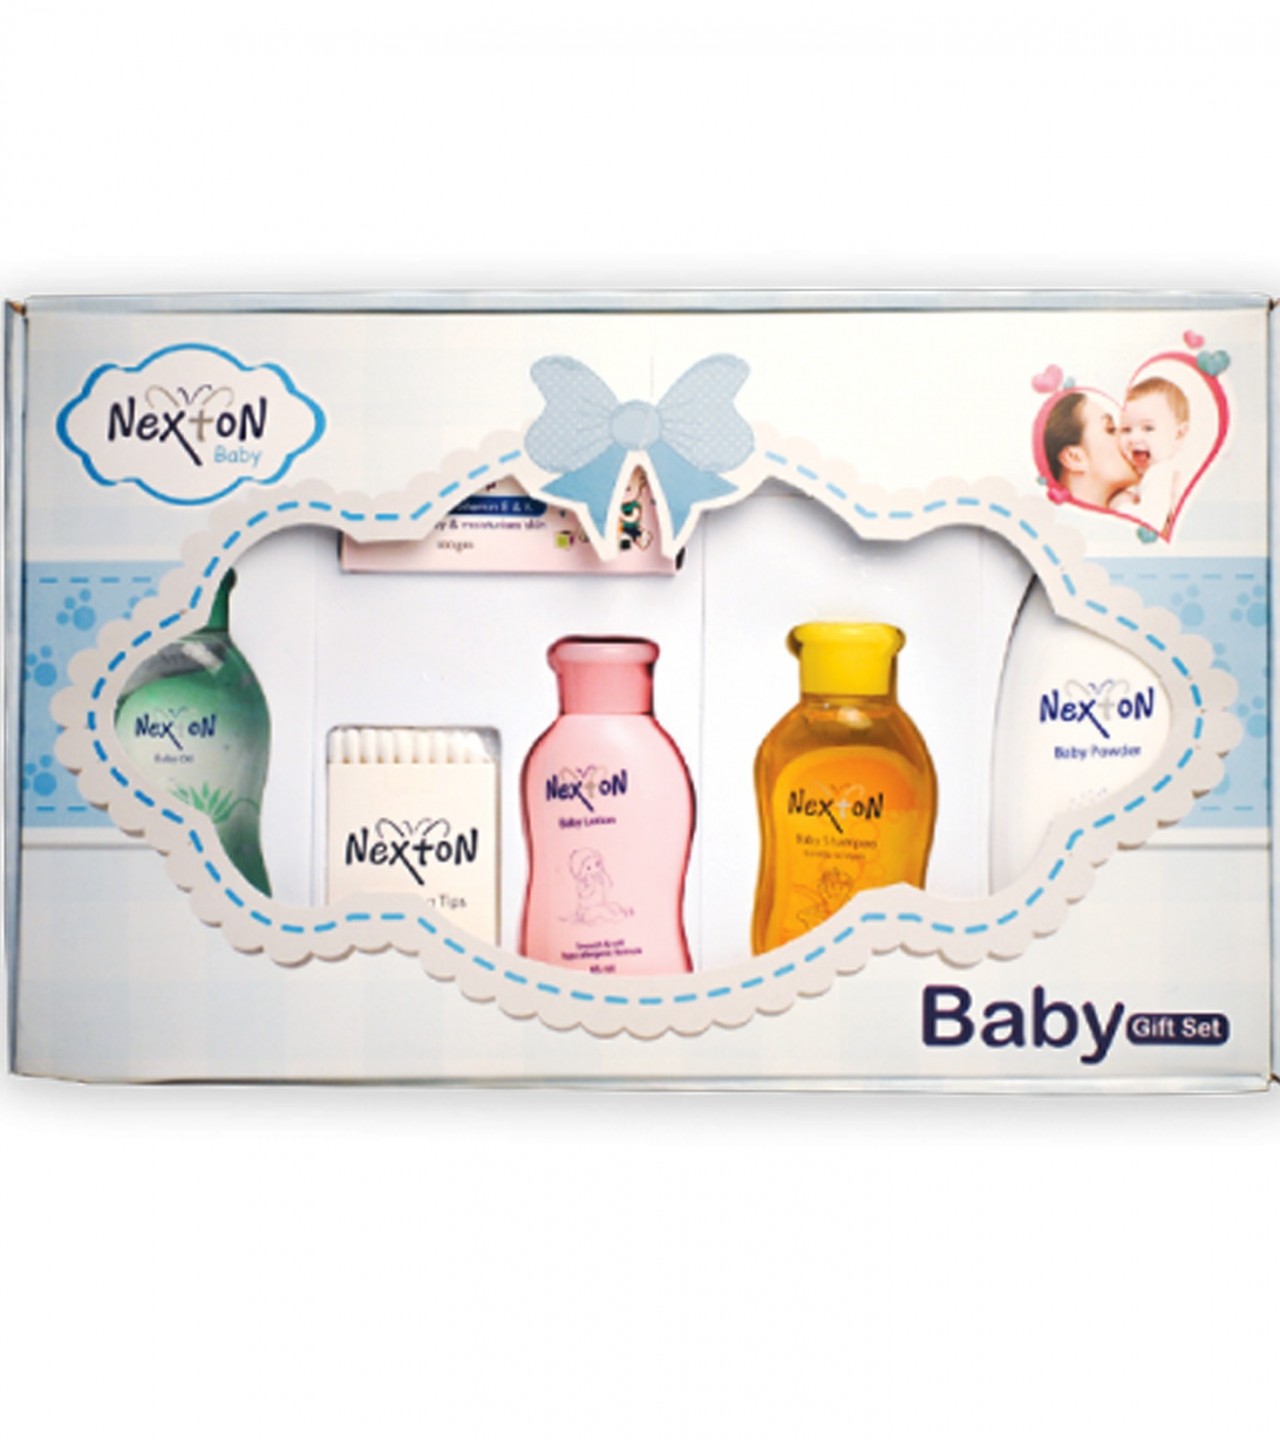 Nexton 6 in 1 Baby Gift Pack (NGS 92205)